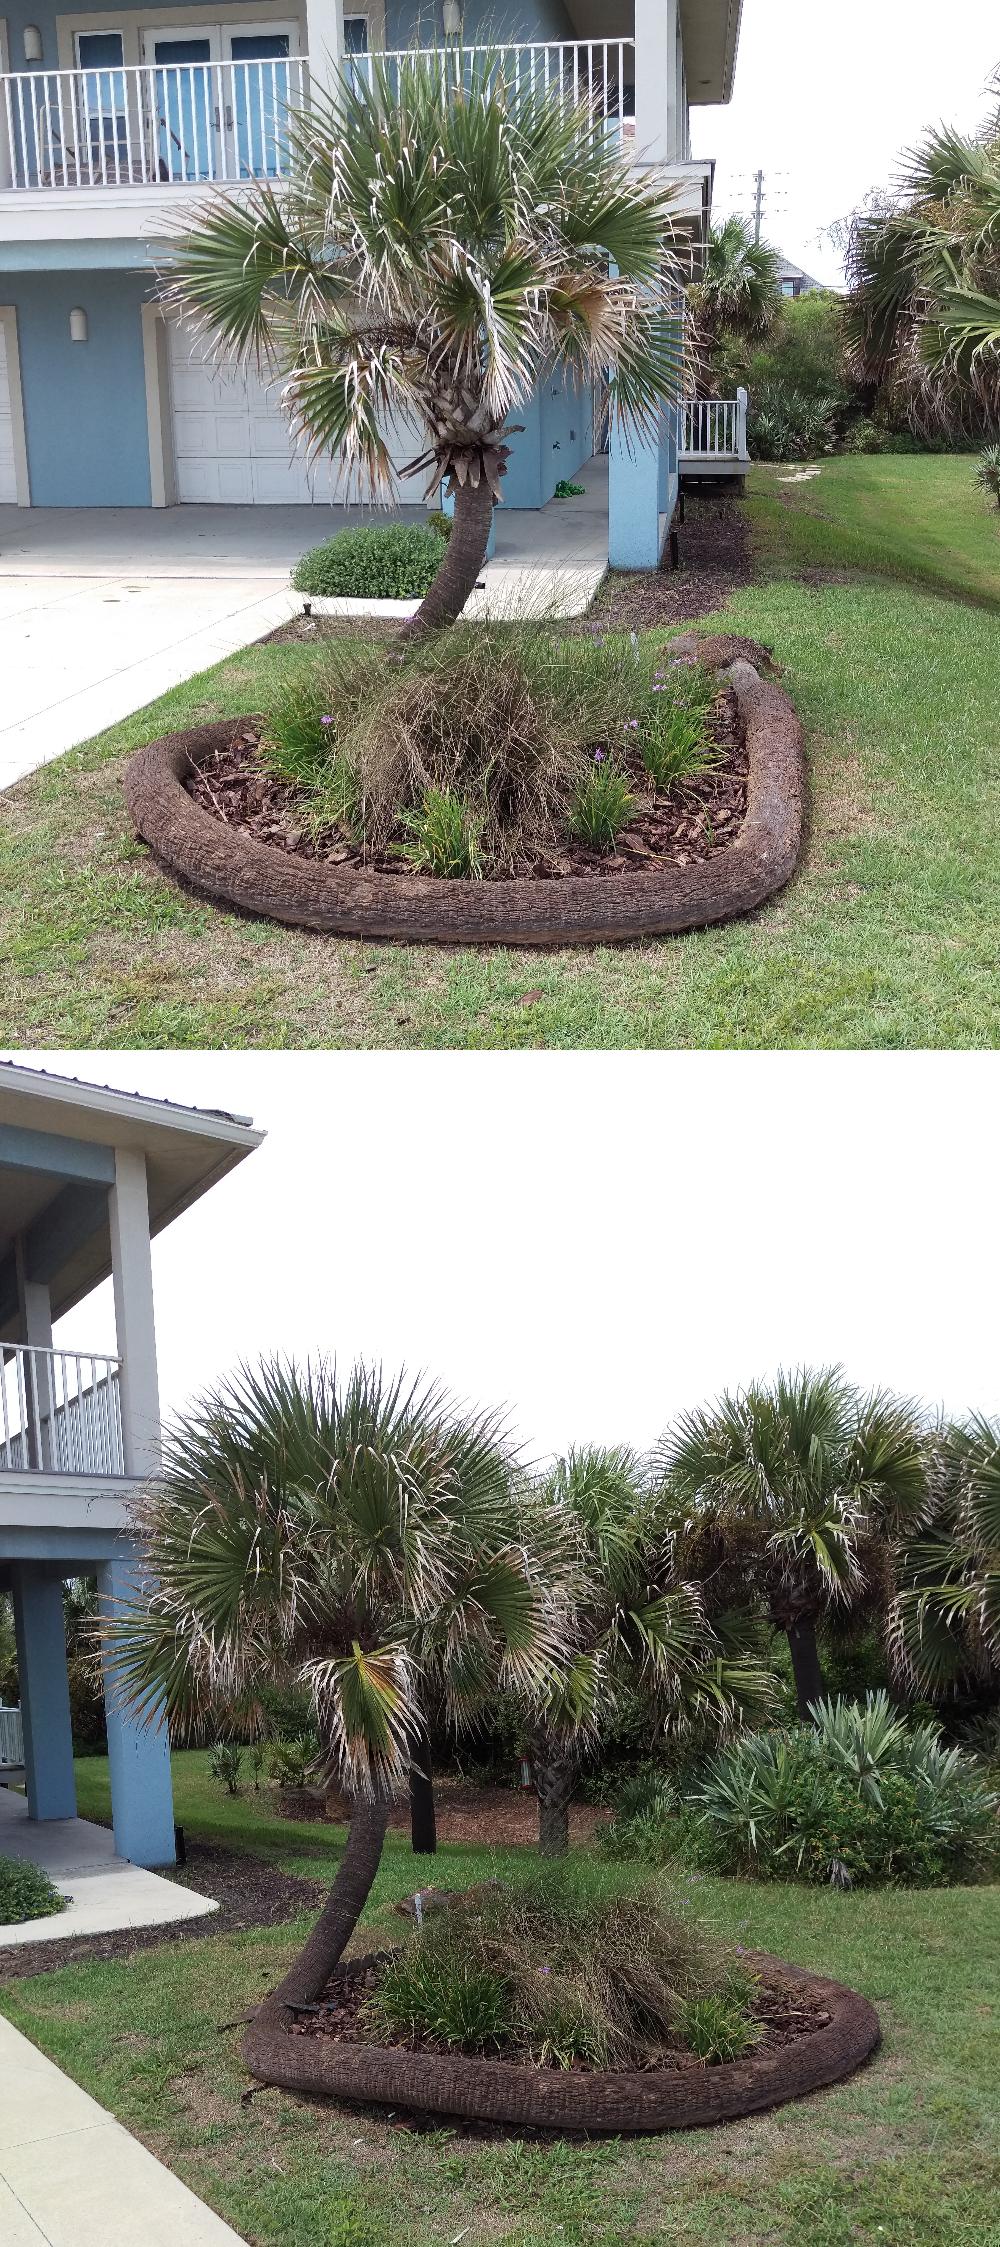 The way this palm tree fell and continued to grow